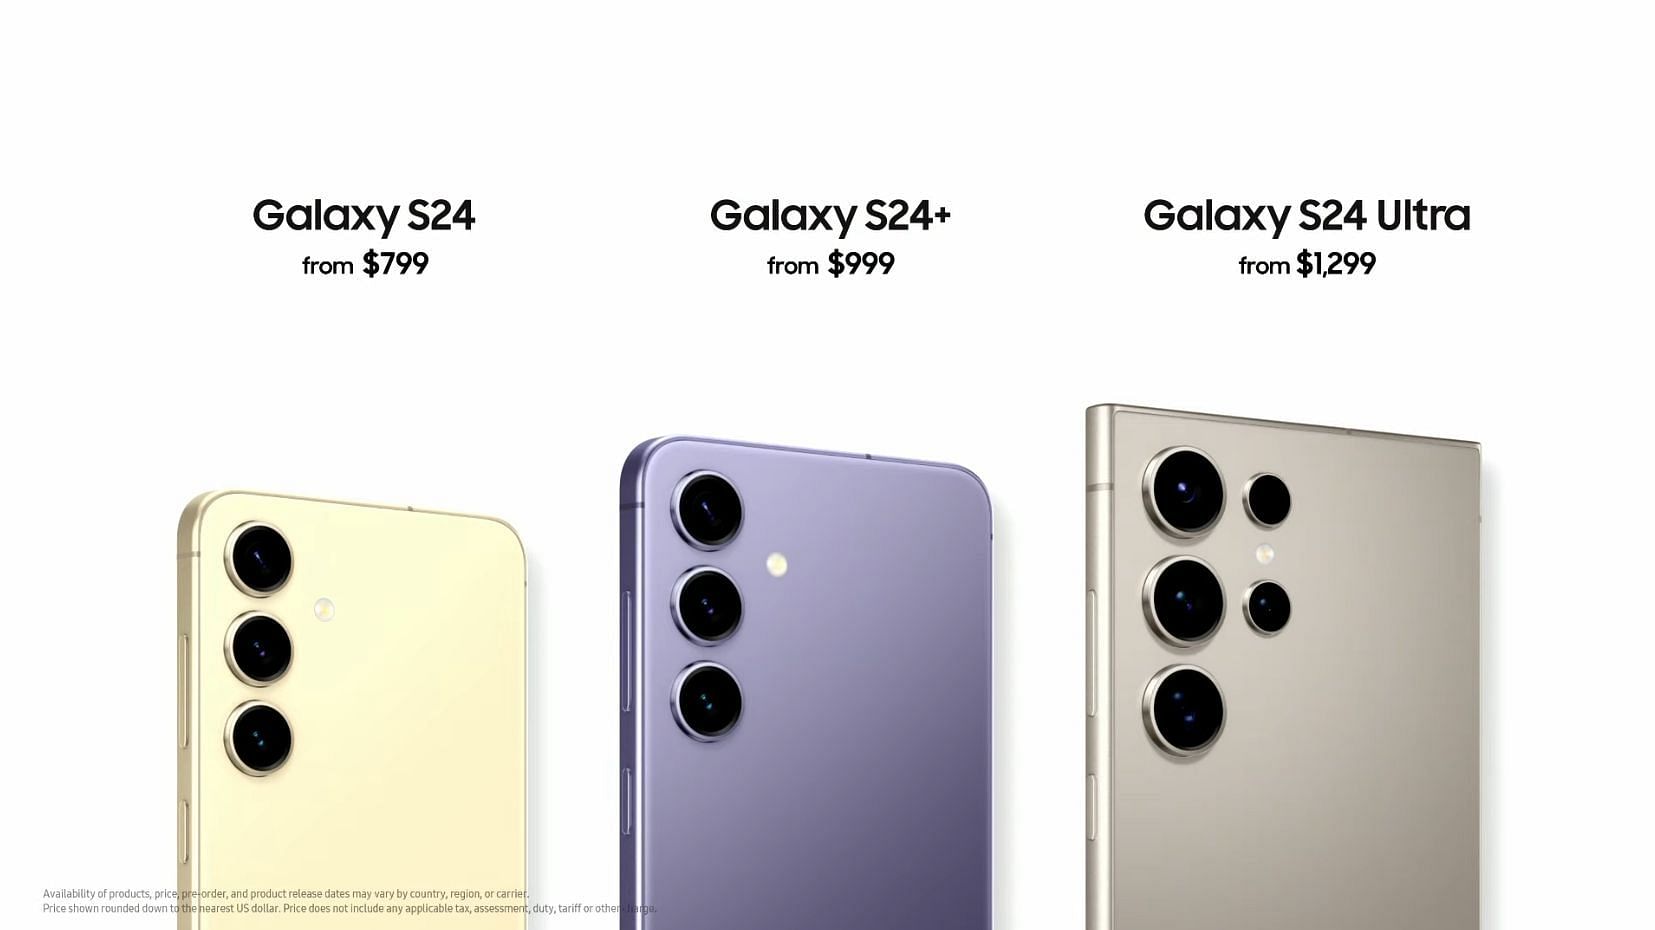 Pricing details of the Galaxy S24 series phones (Image via Samsung)